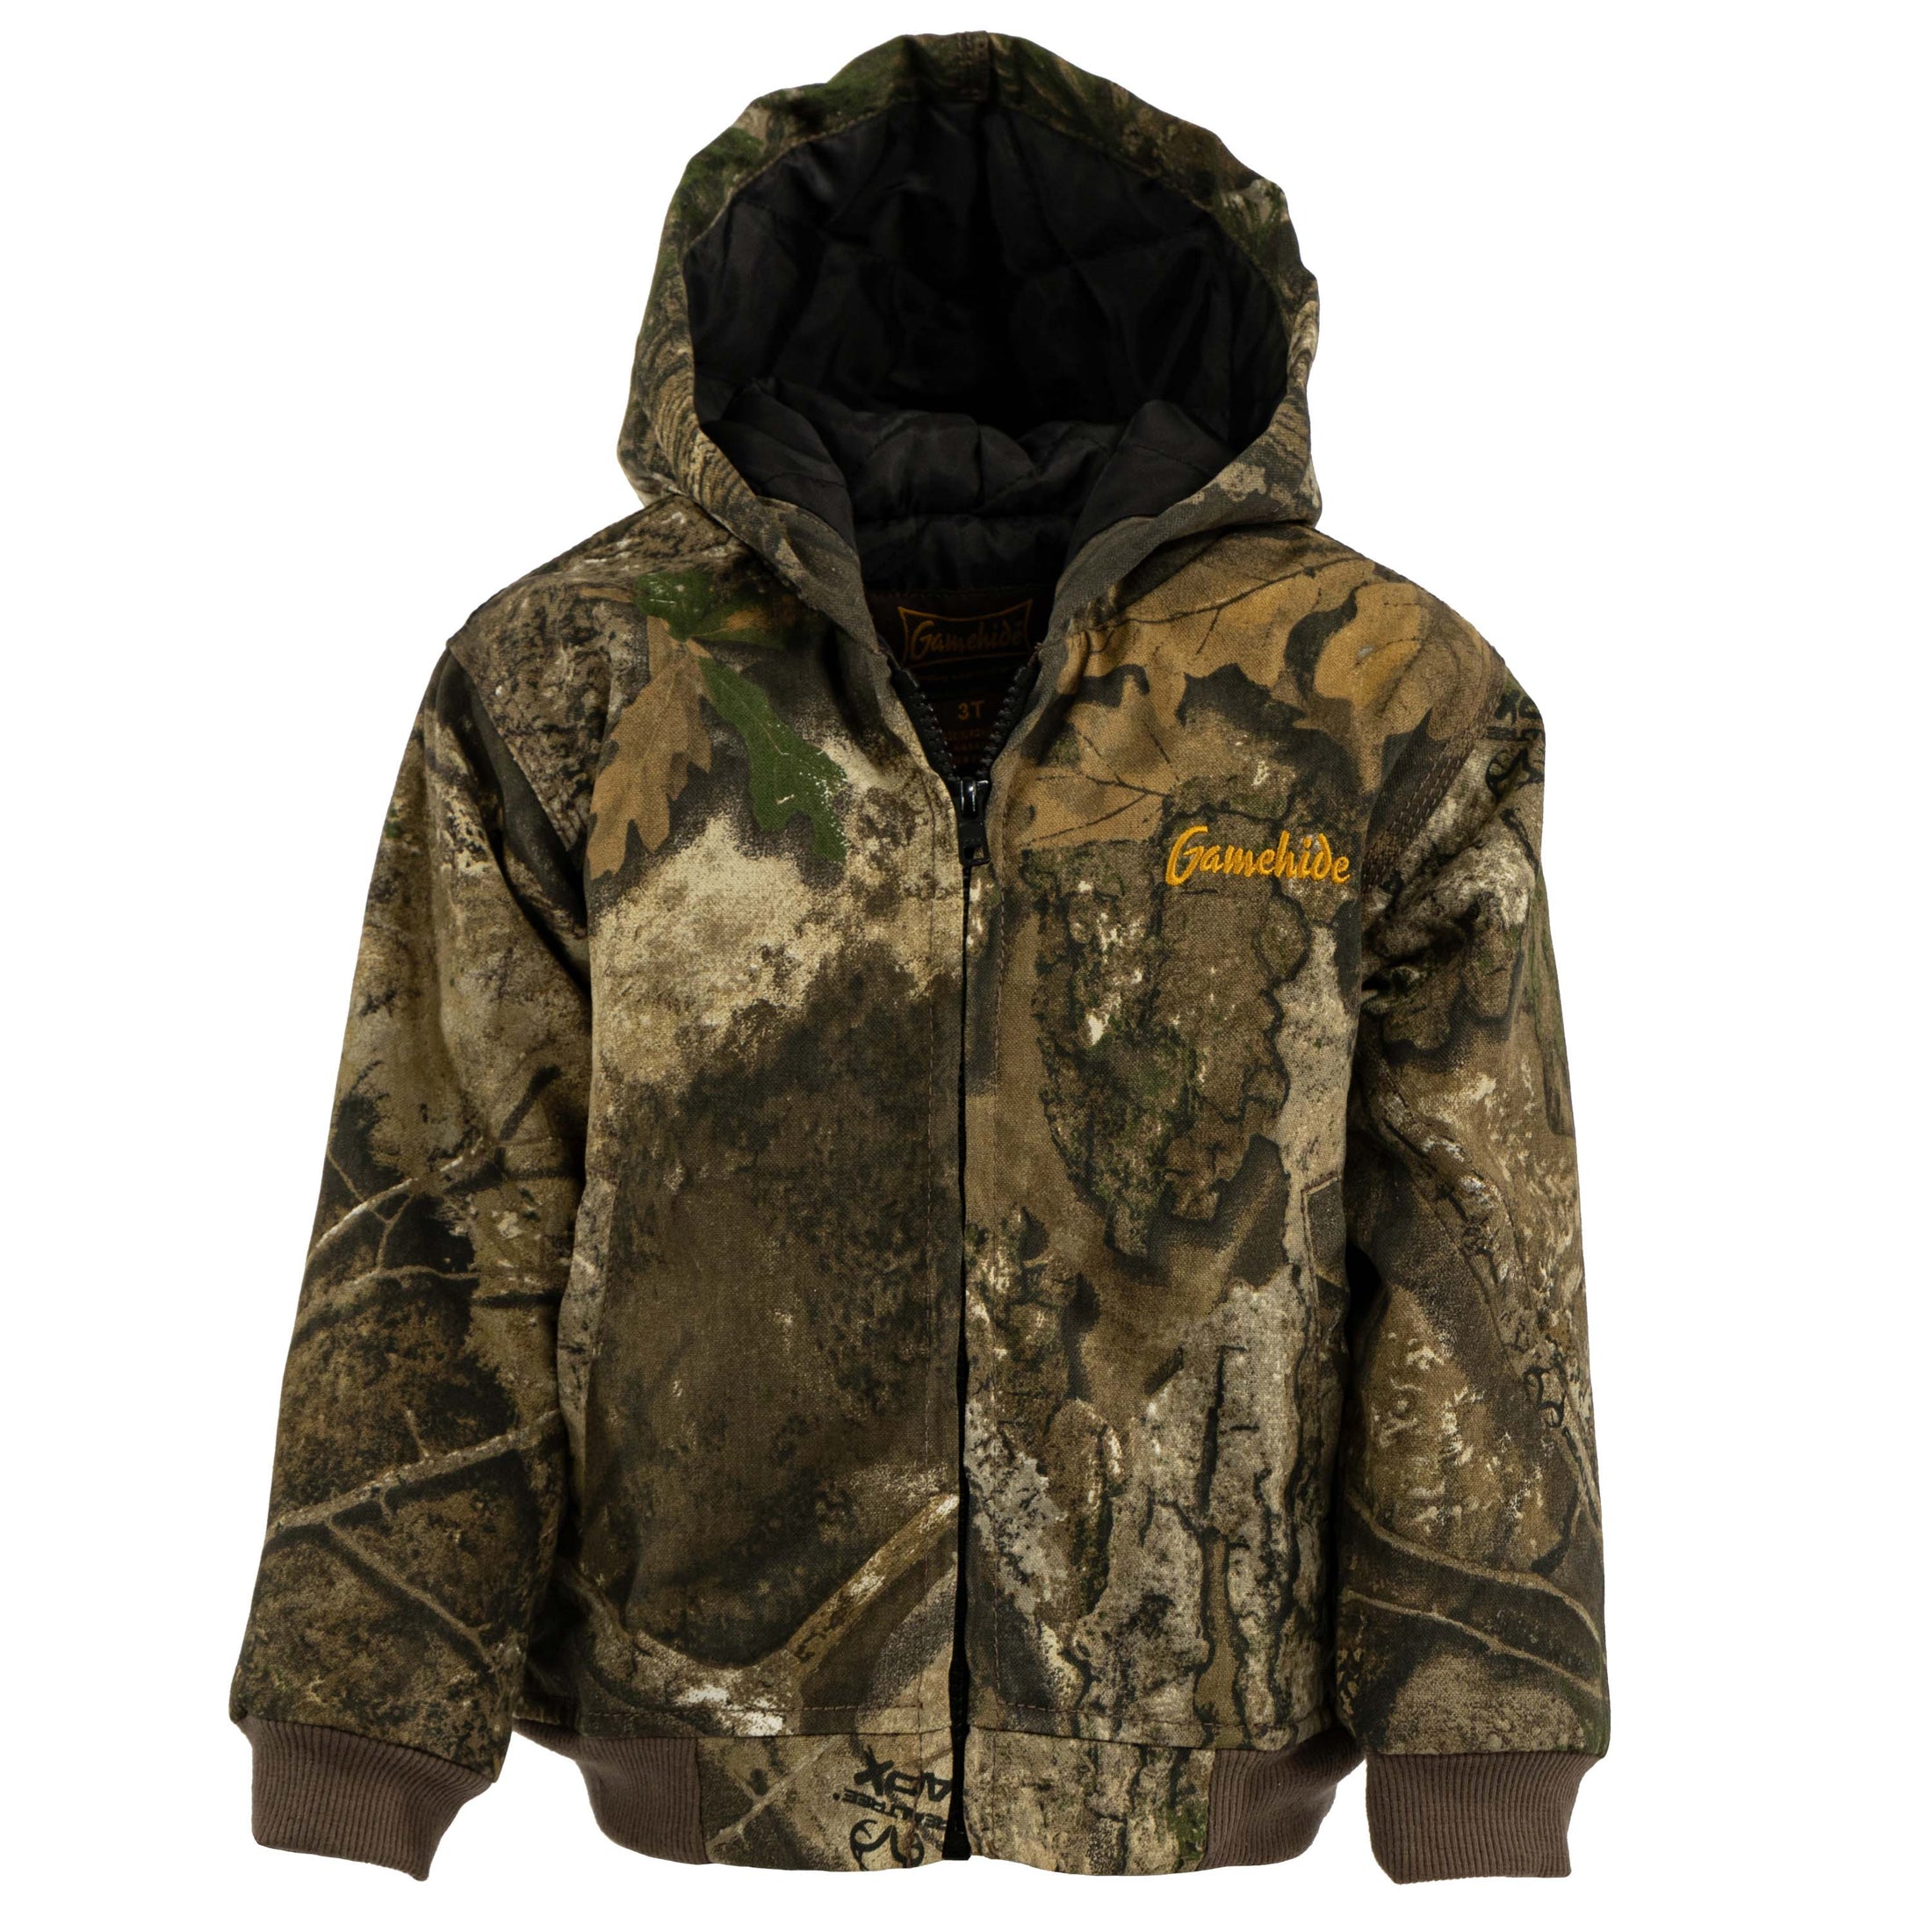 gamehide toddler hunt camp insulated jacket (realtree apx)